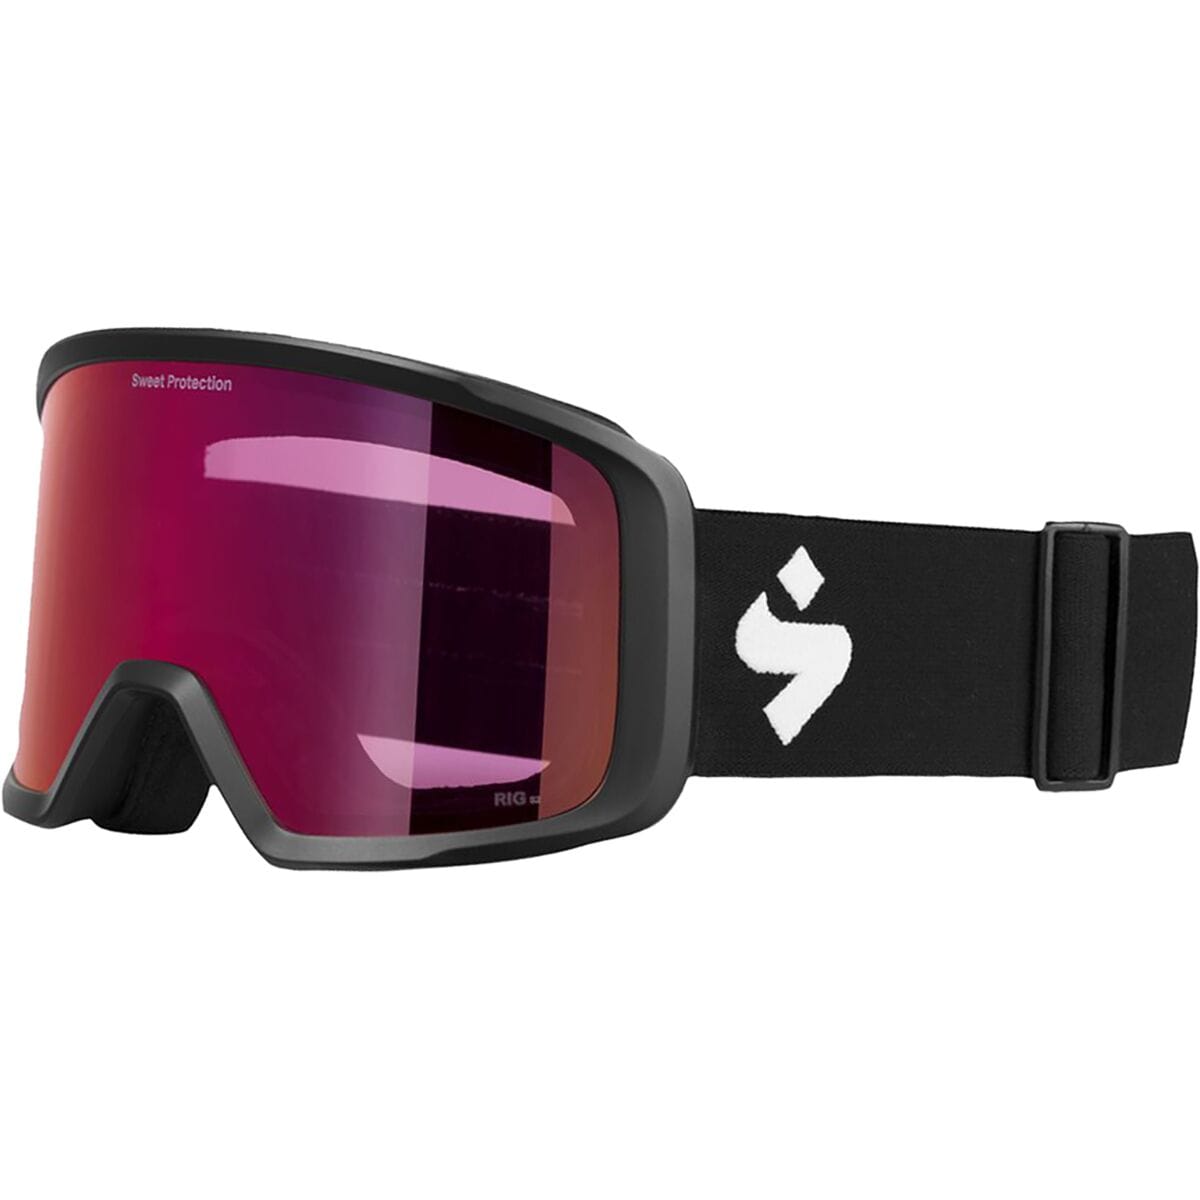 Sweet Protection Firewall RIG Reflect Goggles